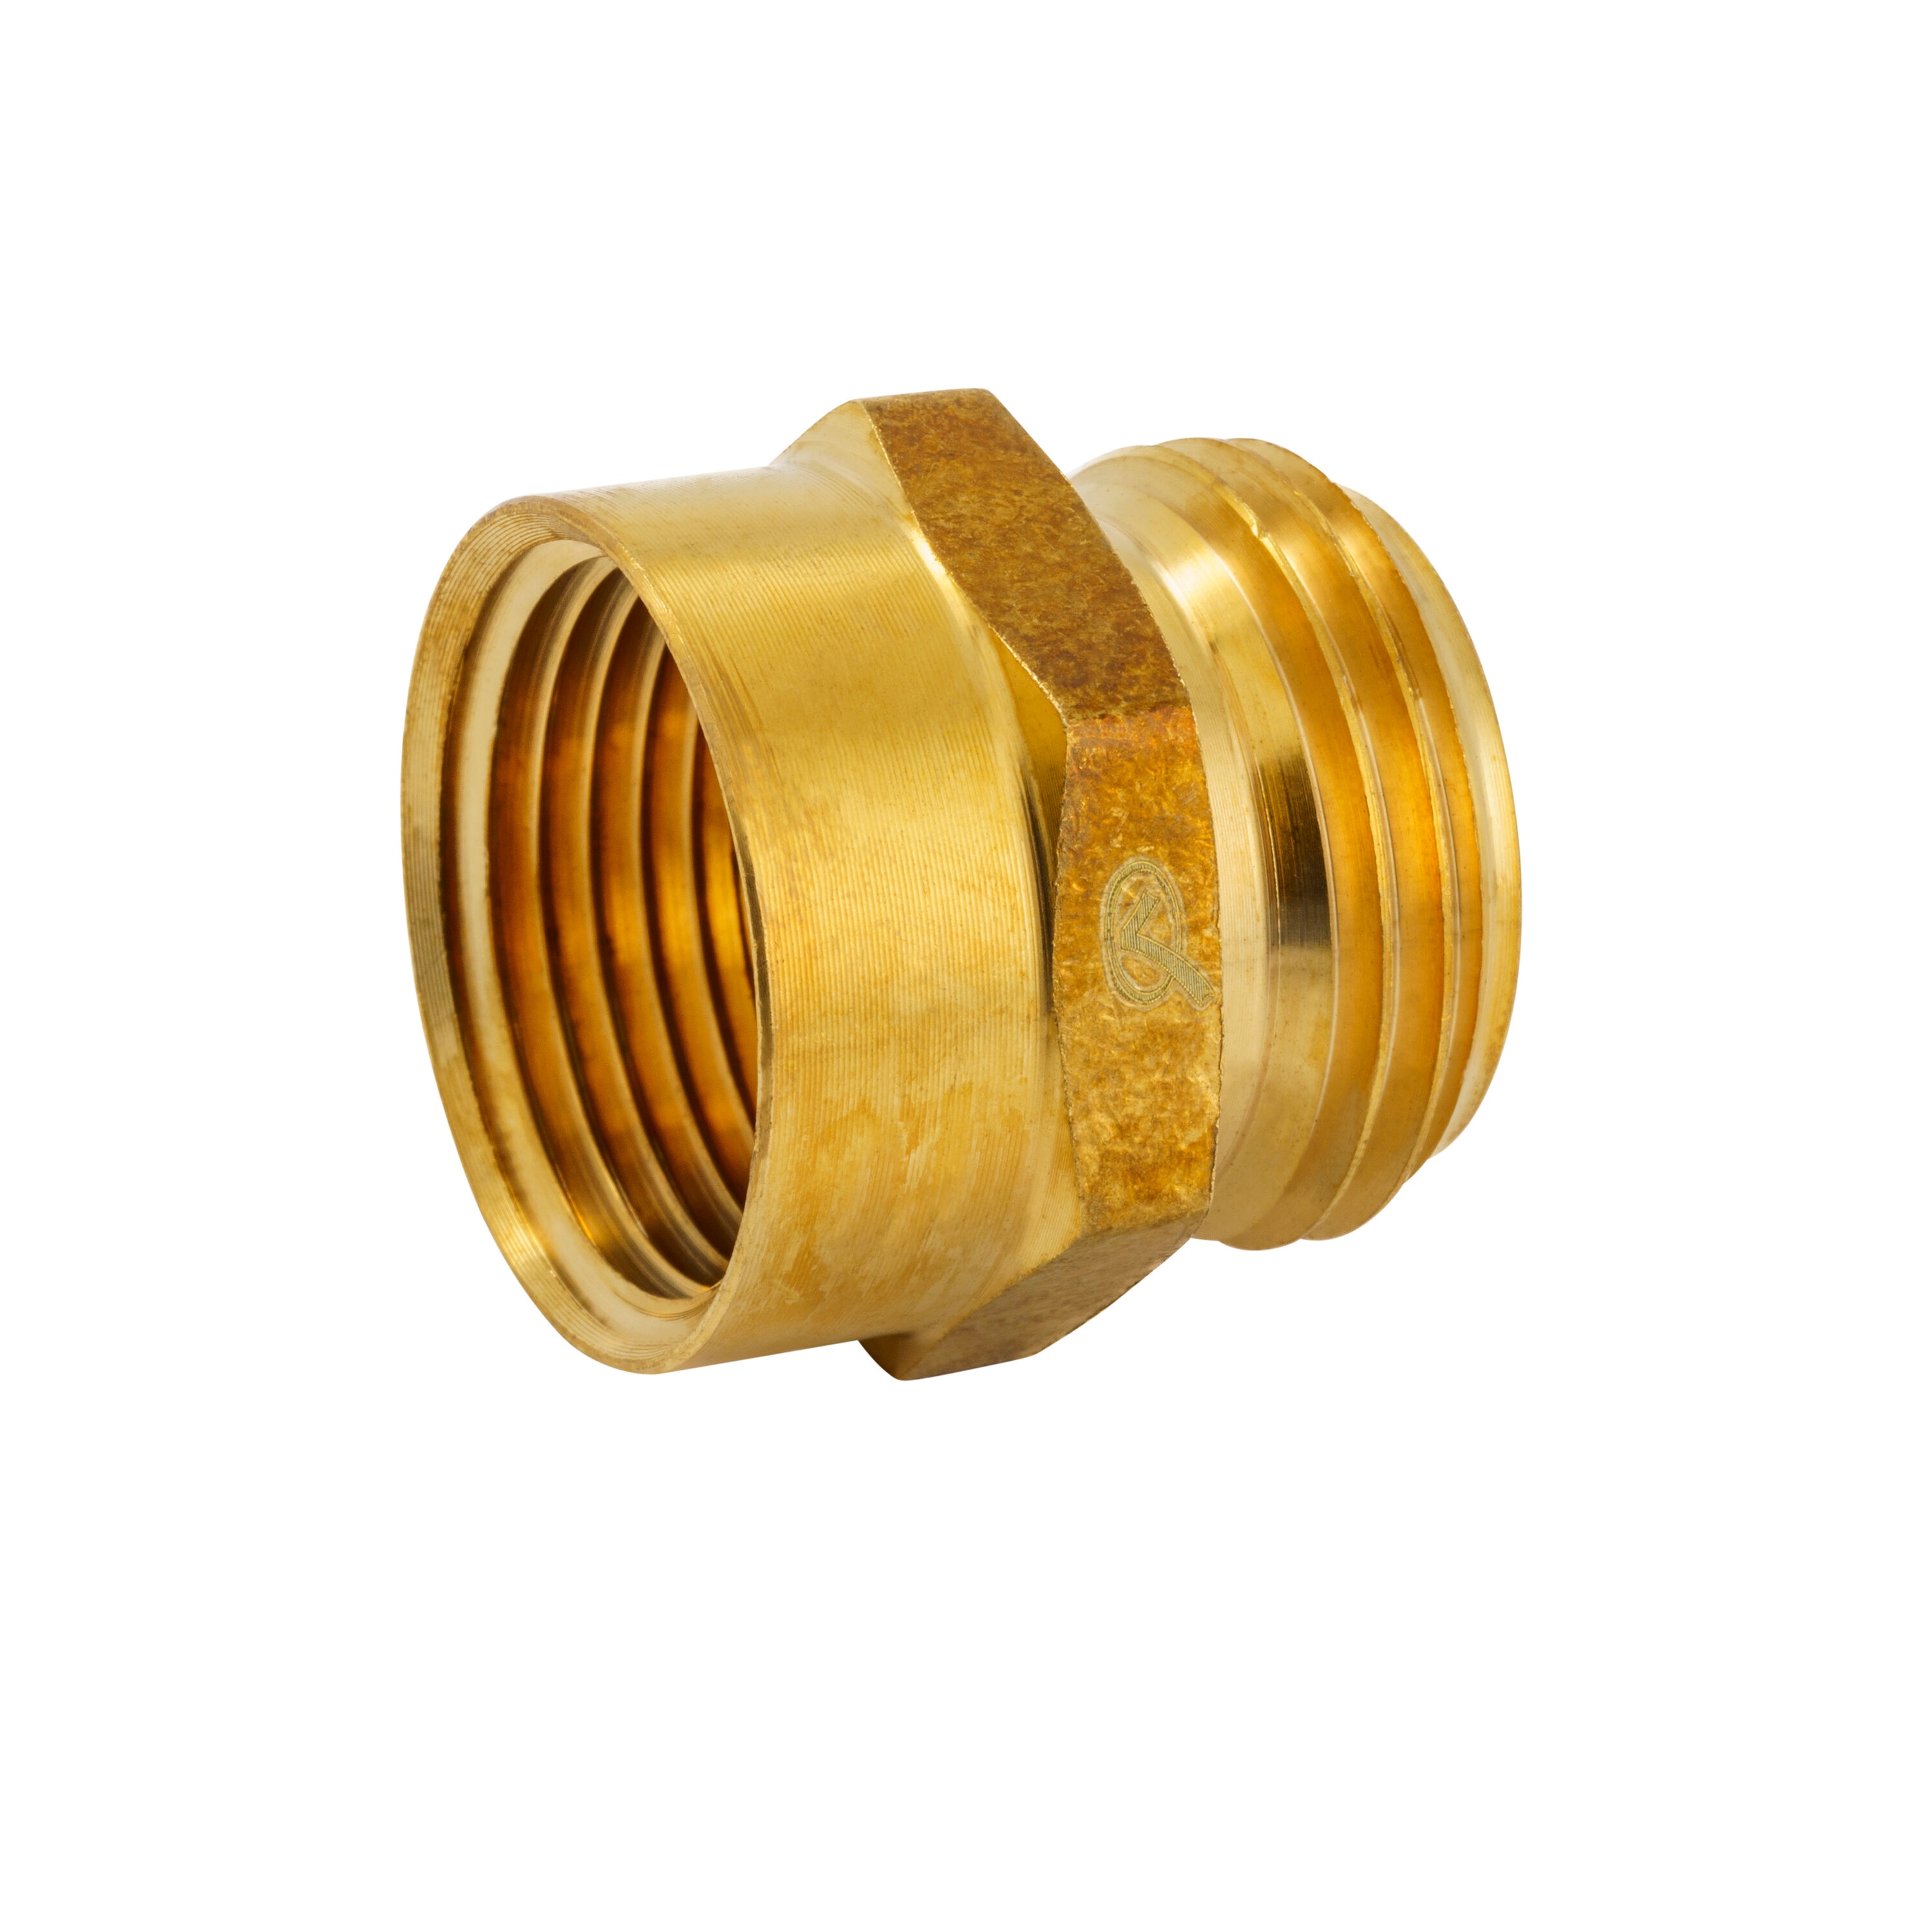 Brass Barb Hose Fitting, 90 Degree Elbow 6mm Barbed to 1/8 G Male Pipe  Adapter Connector 2pcs 